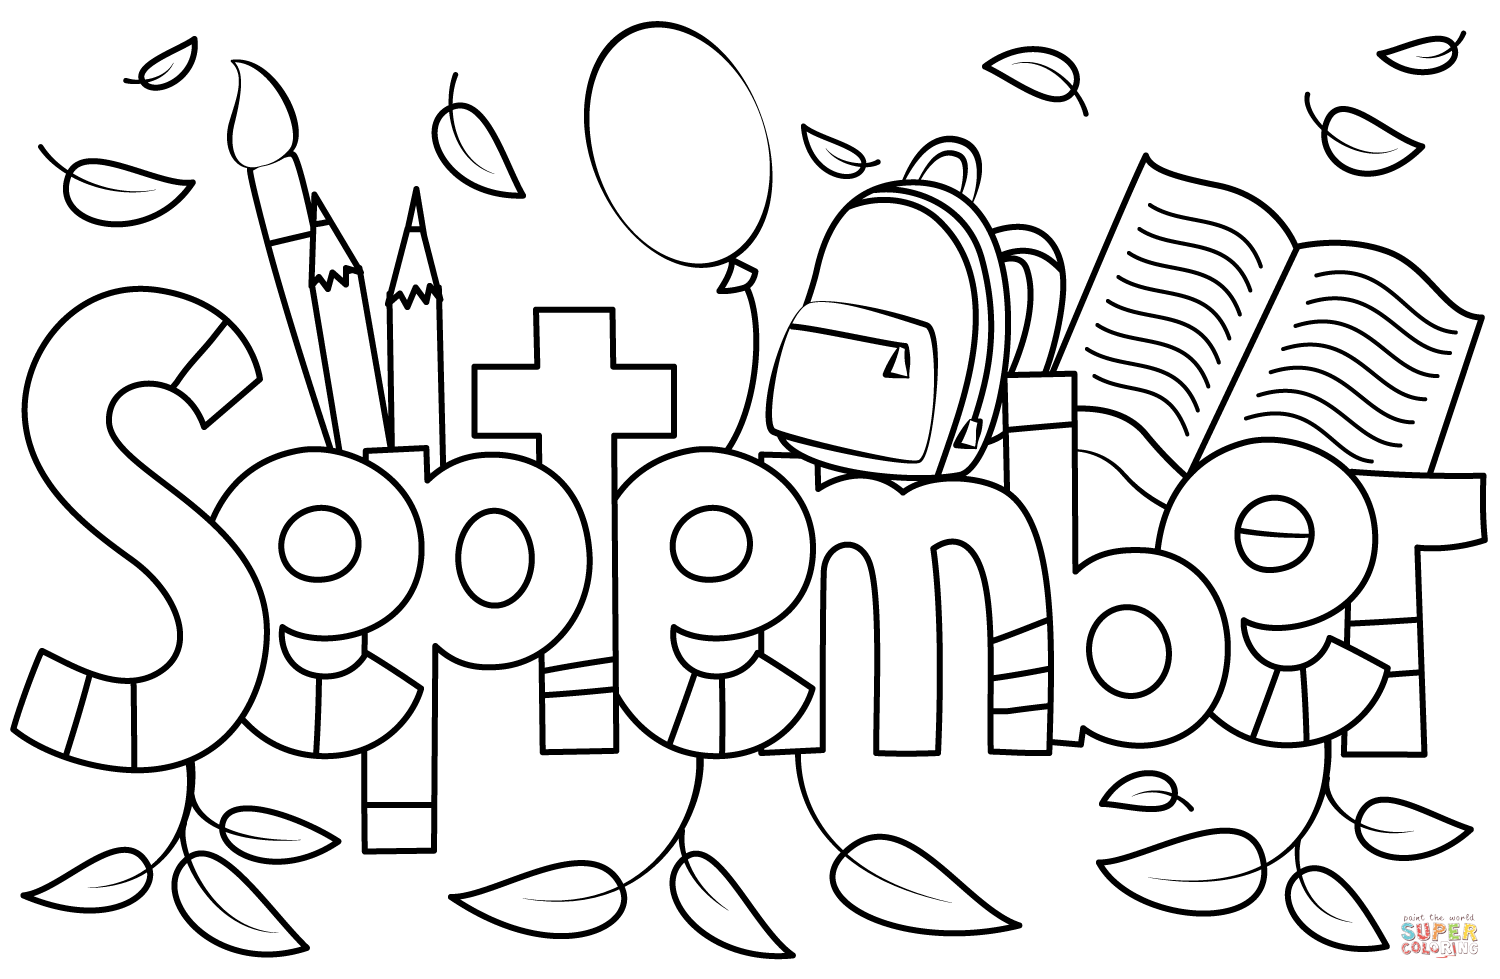 September coloring page free printable coloring pages